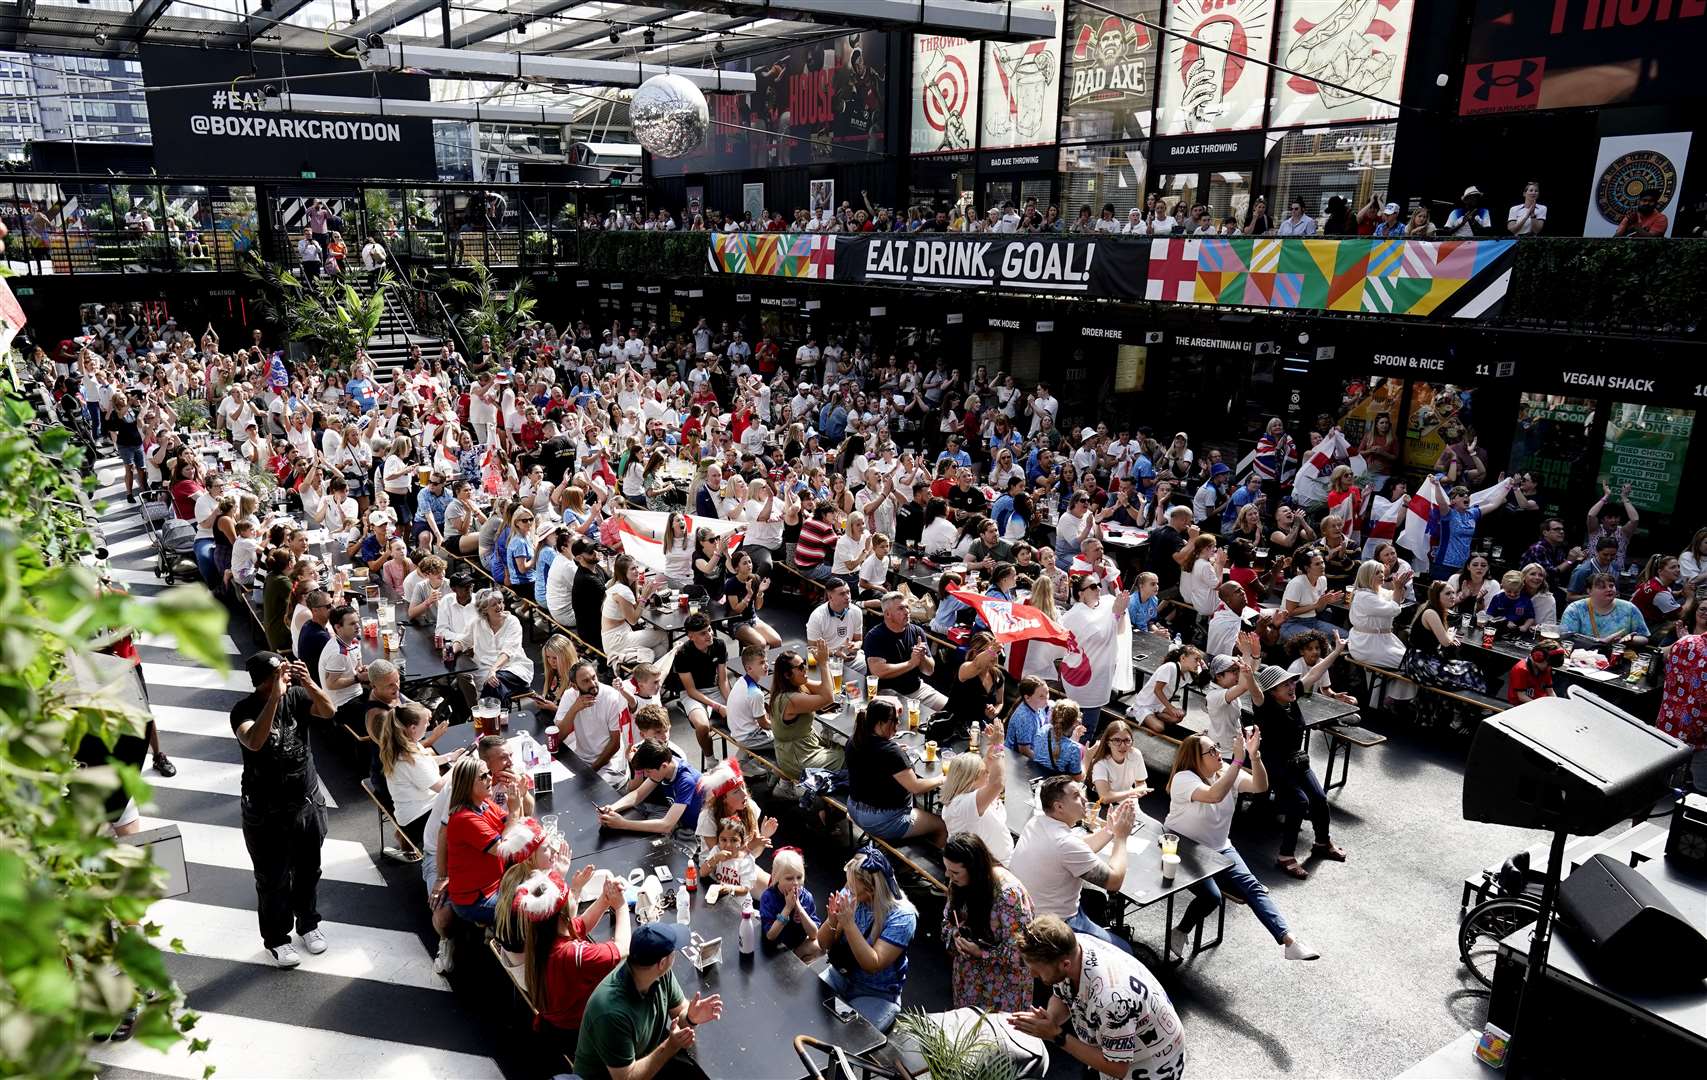 England fans watched the semi-final between Australia and England at Boxpark Croydon (Aaron Chown/PA)